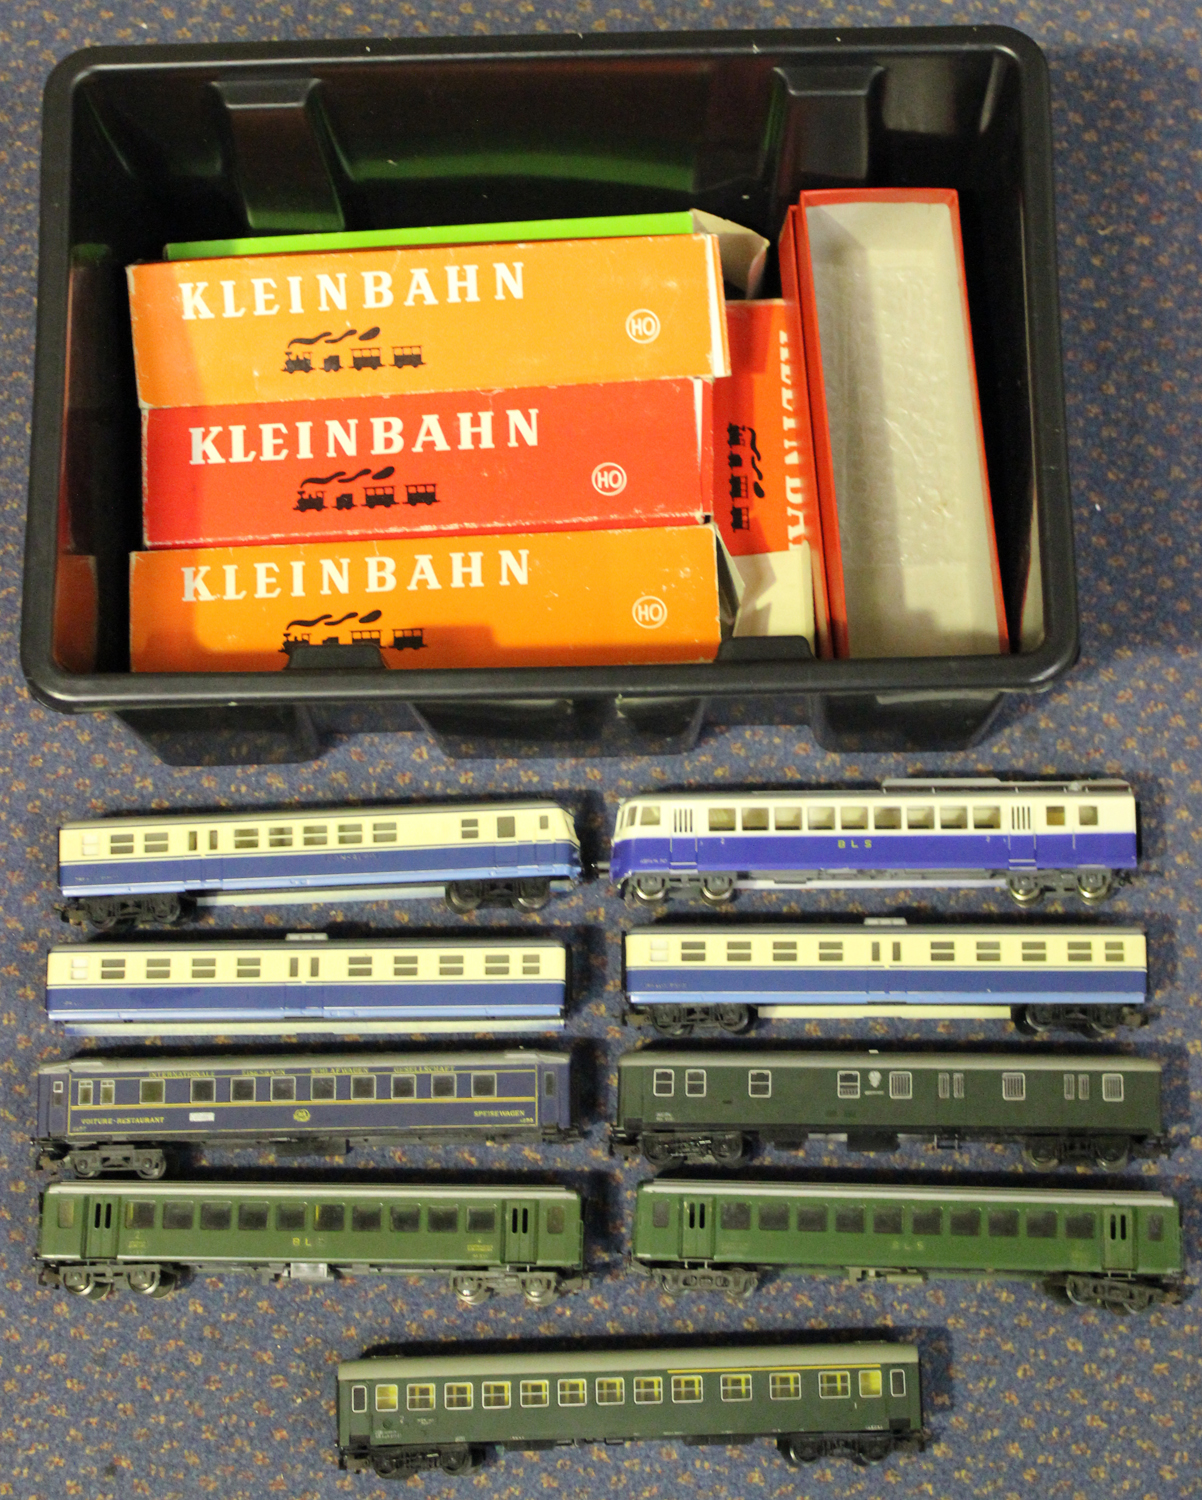 A collection of Kleinbahn gauge HO railway items, including an electric locomotive, boxed, two other - Image 2 of 2